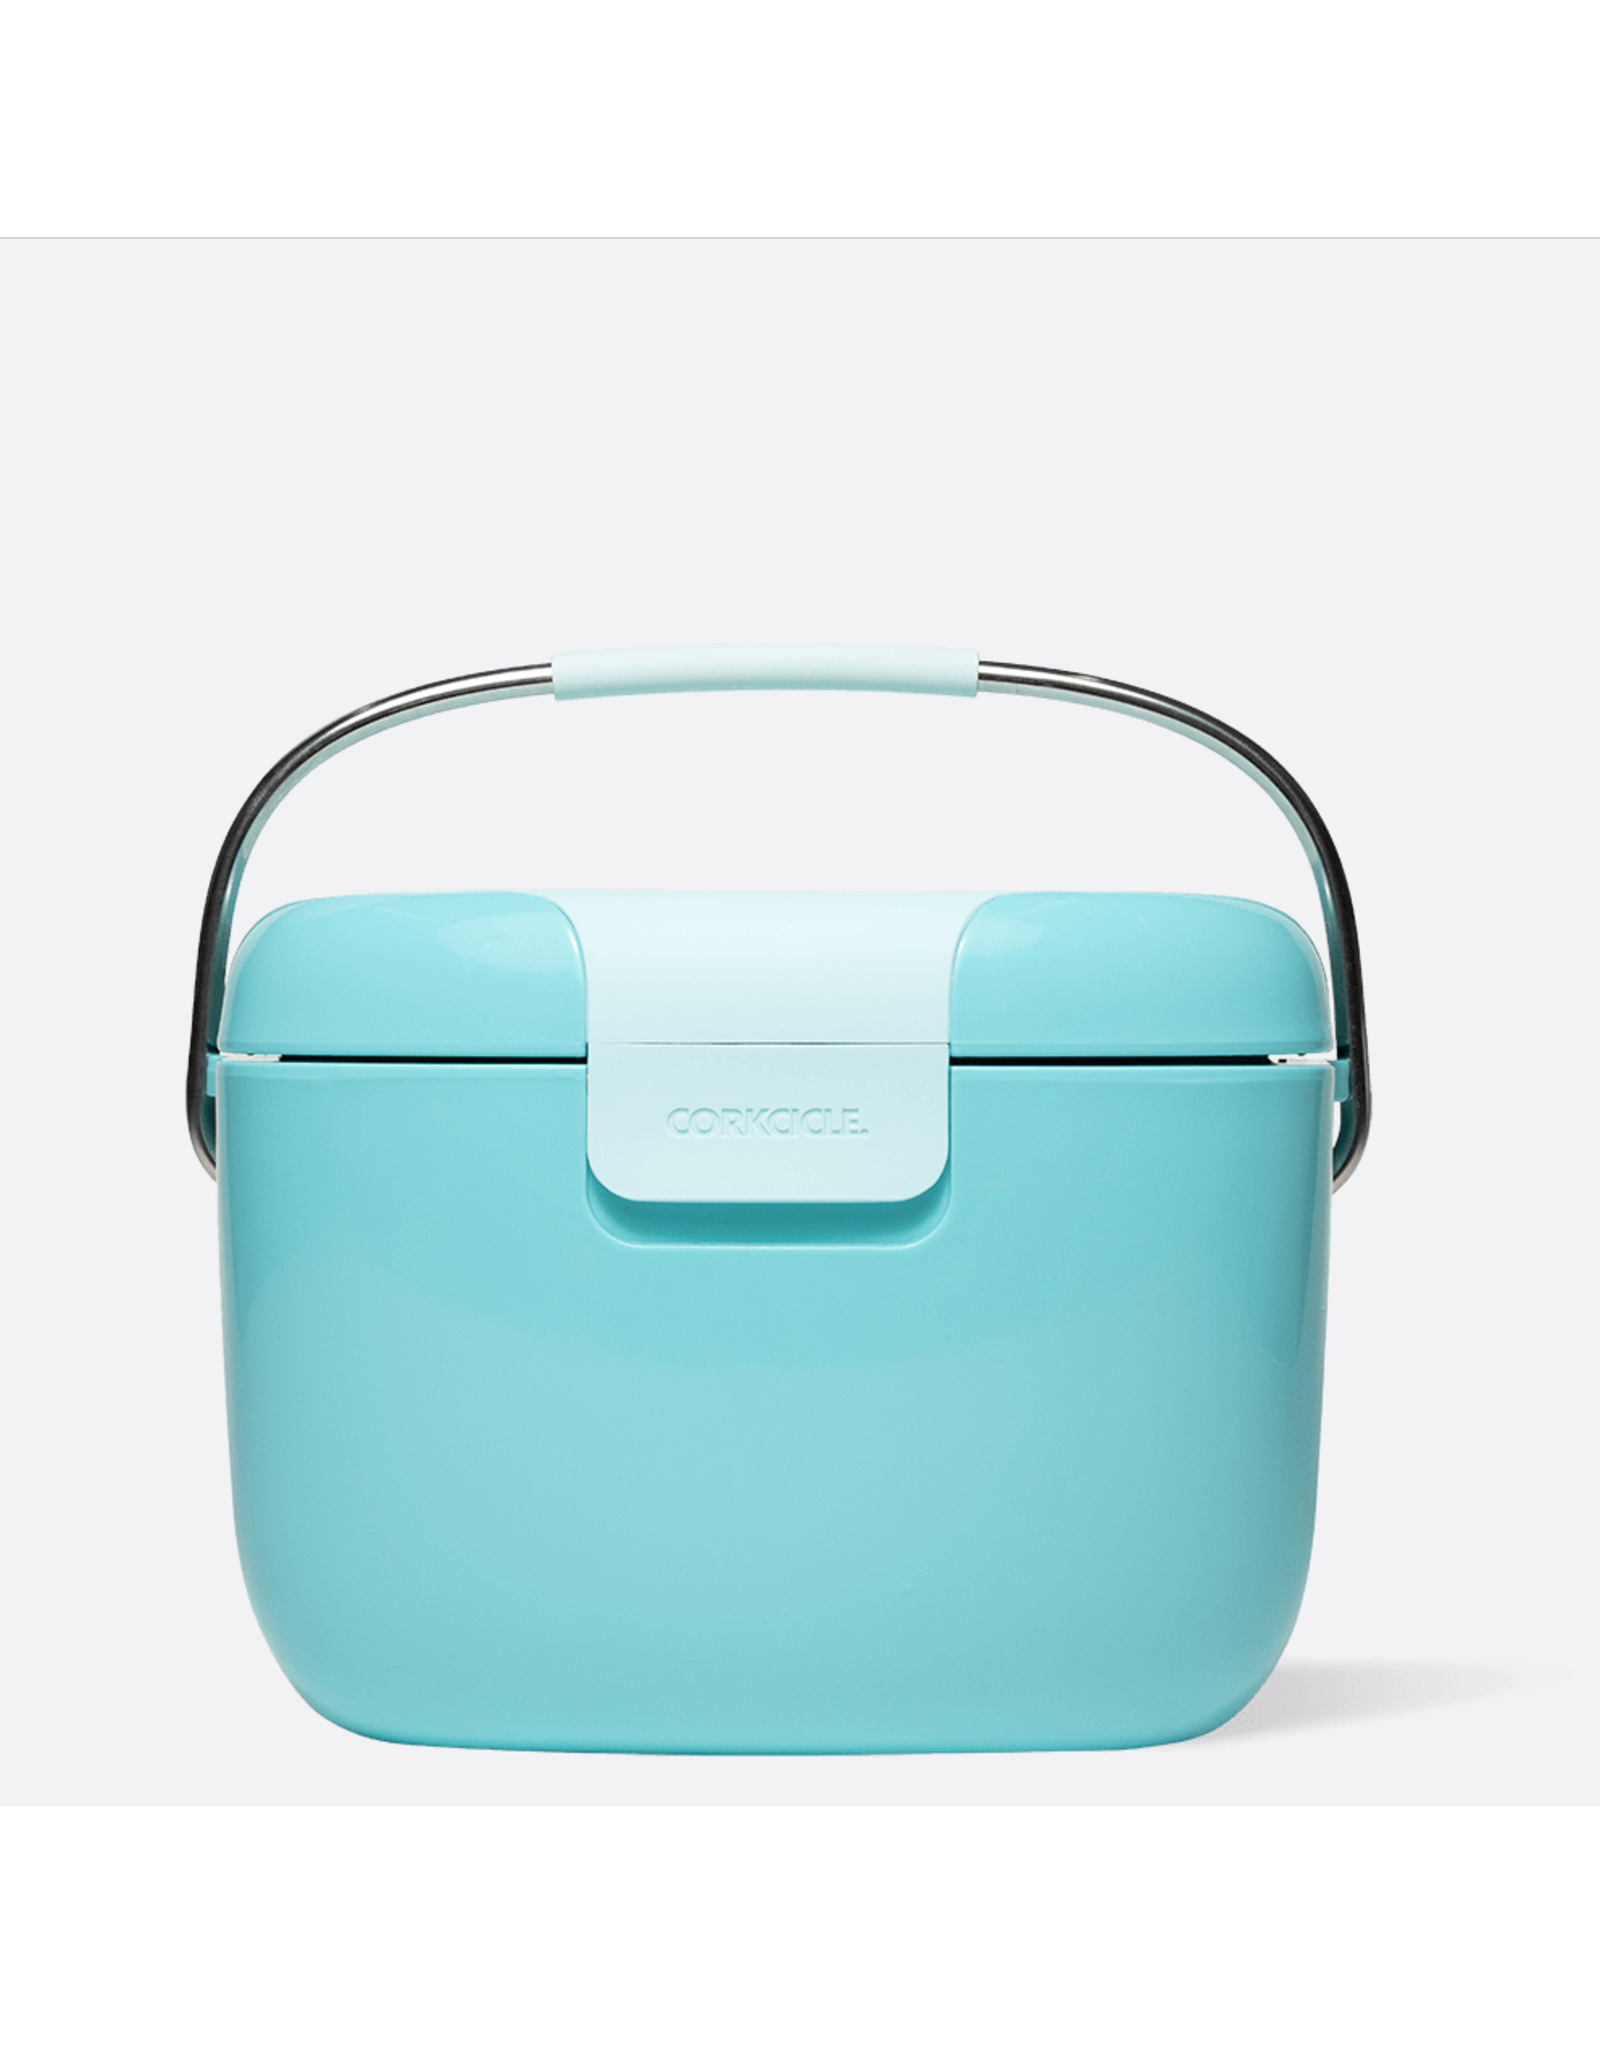 Corkcicle Chillpod Cooler - Turquoise